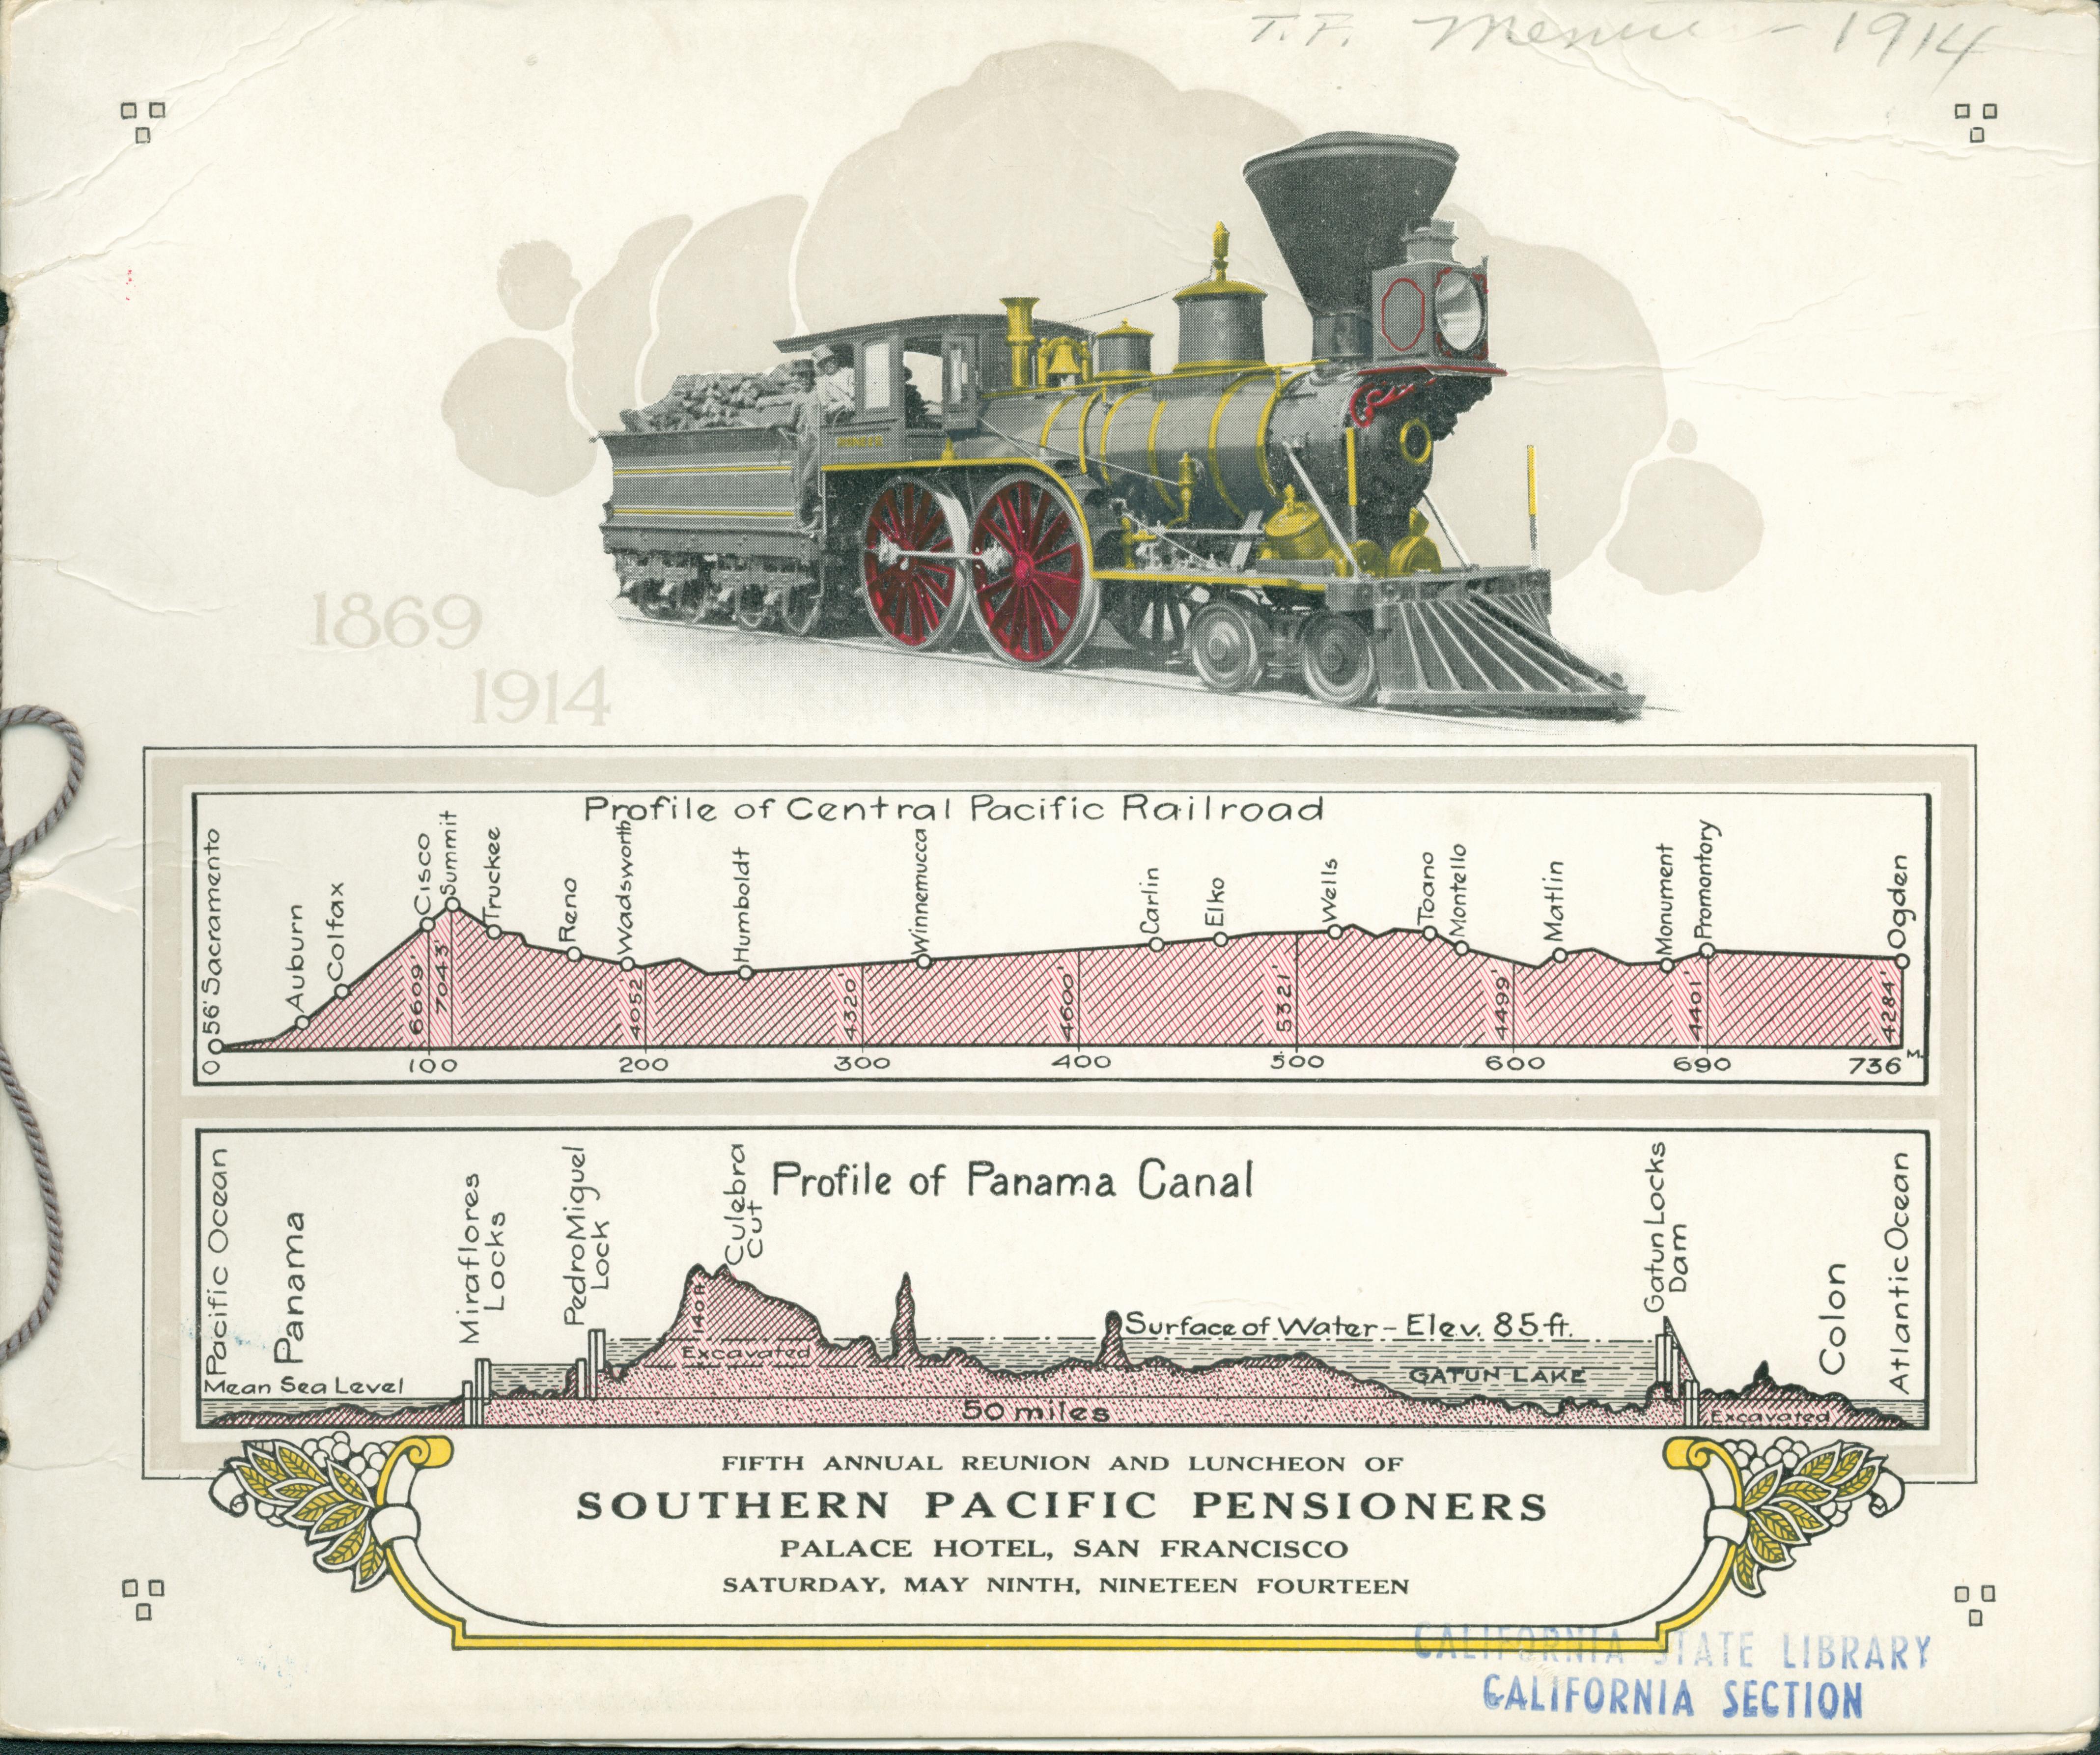 The cover of this menu shows a railroad engine above two charts showing the elevation profiles of the Central Pacific railroad line and the Panama Canal